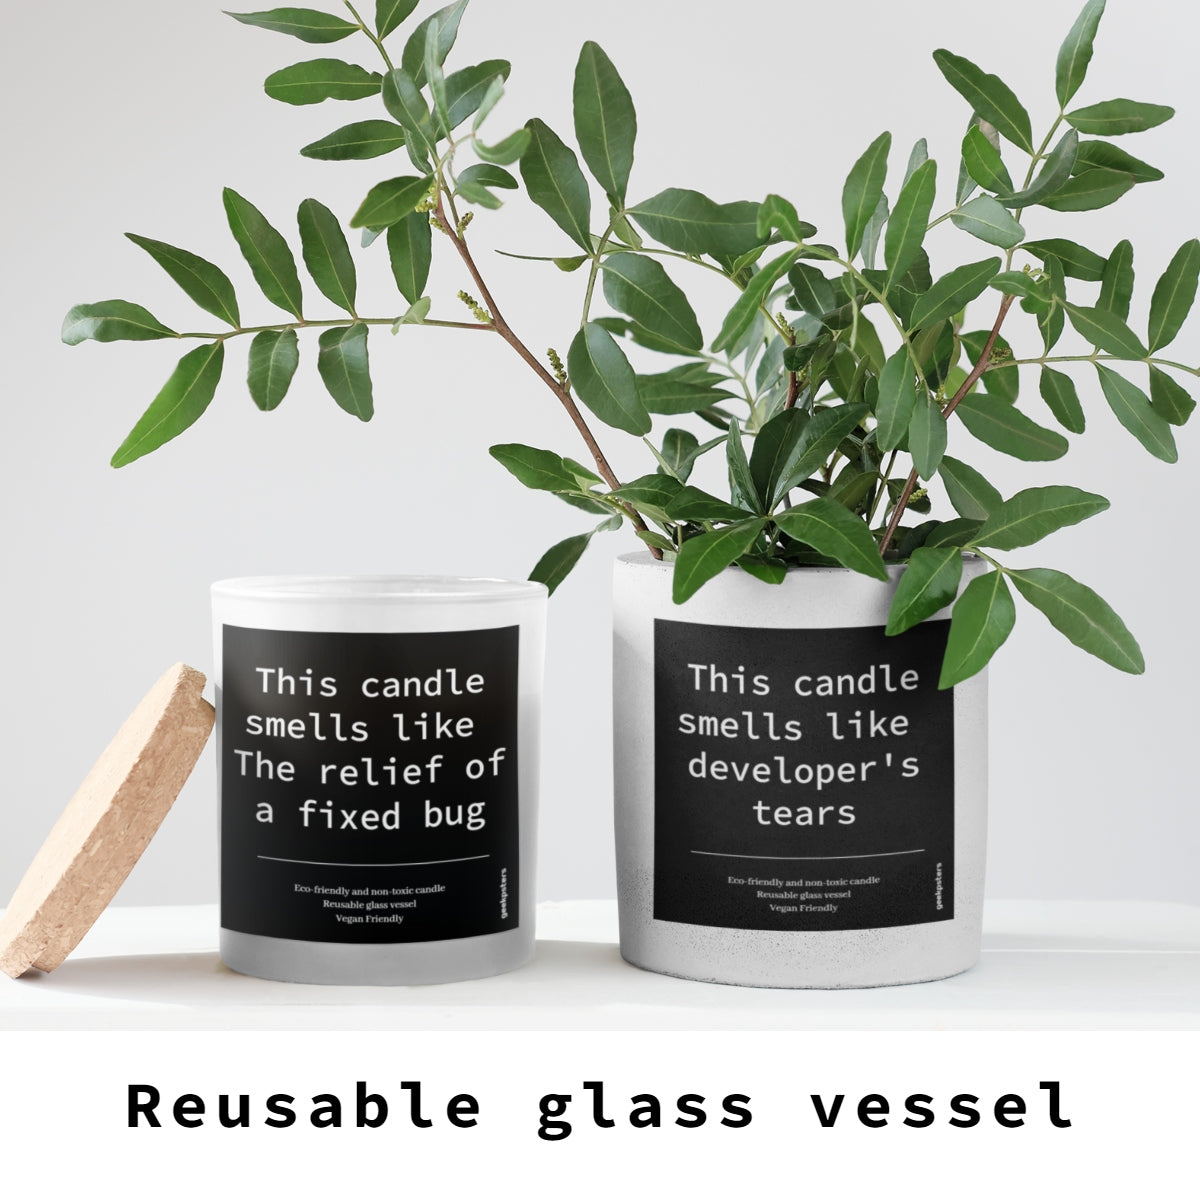 Two "This Candle is Open Source - Feel Free to Fork It" soy candles in reusable glass jars labeled humorously with "this candle smells like the relief of a fixed bug" and "this candle smells like developer's tears," beside a green plant.